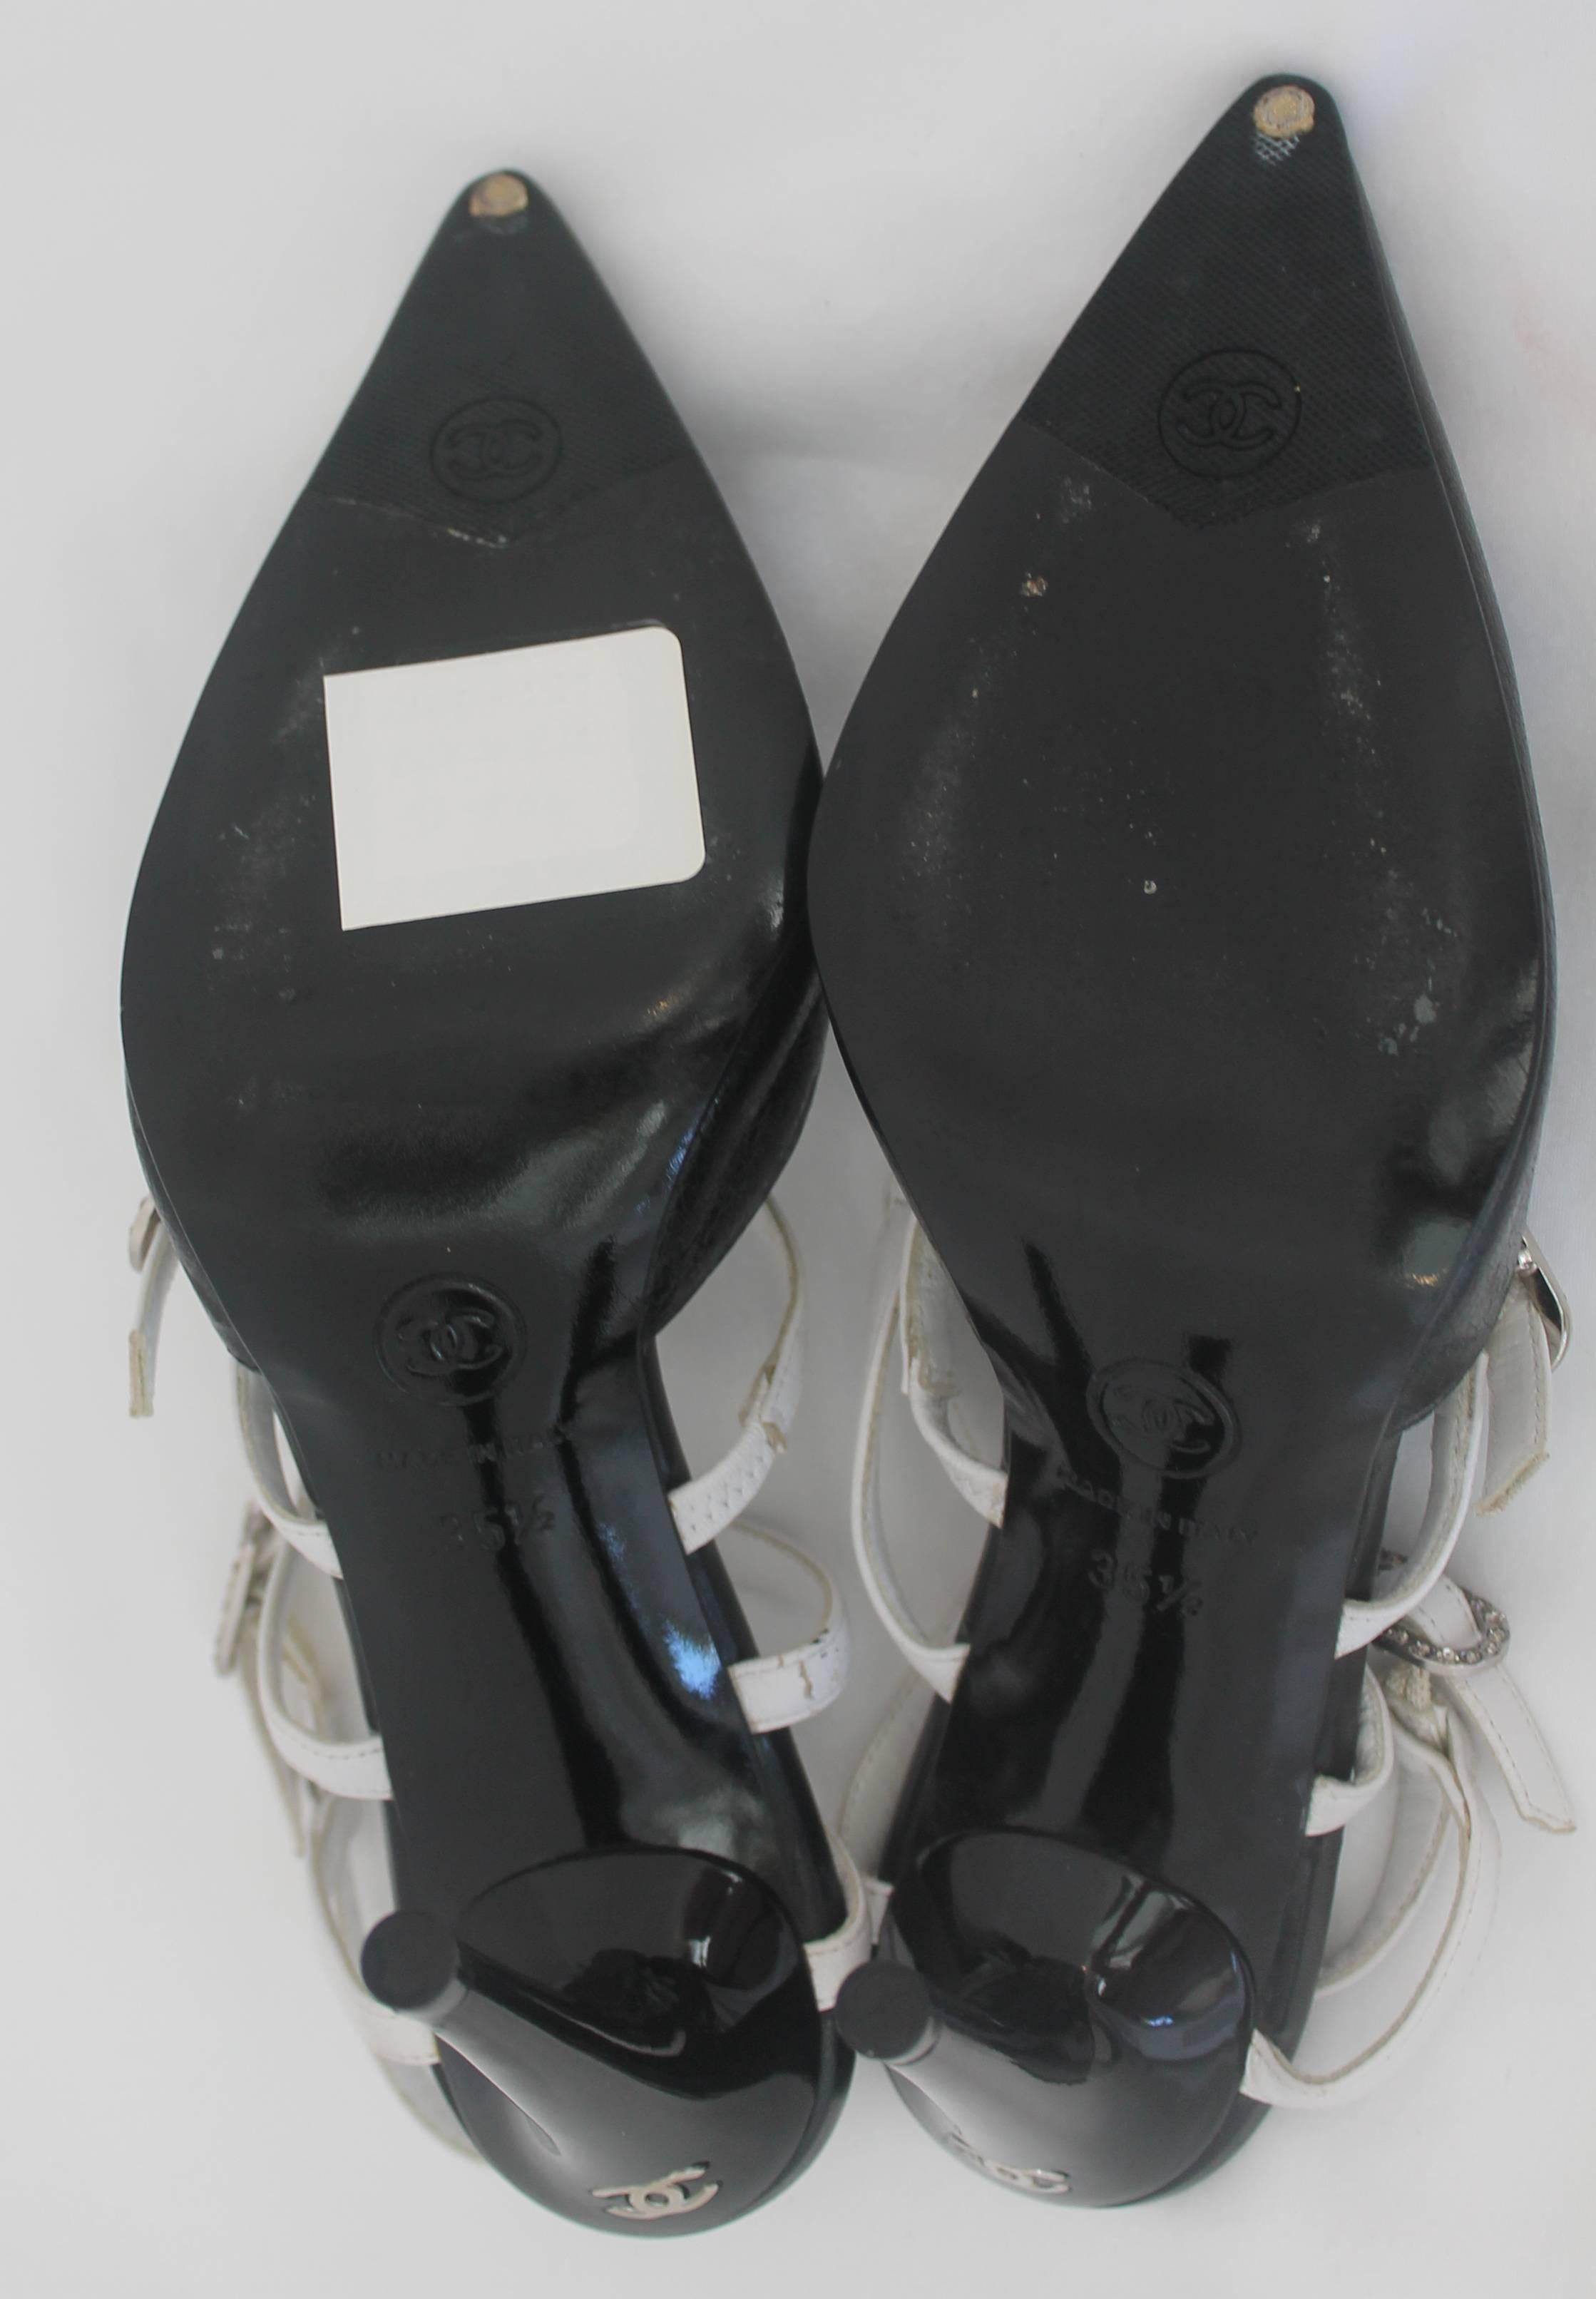 Chanel Black and White Cracked Patent Leather Pointed-Toe Heels - 35.5 1